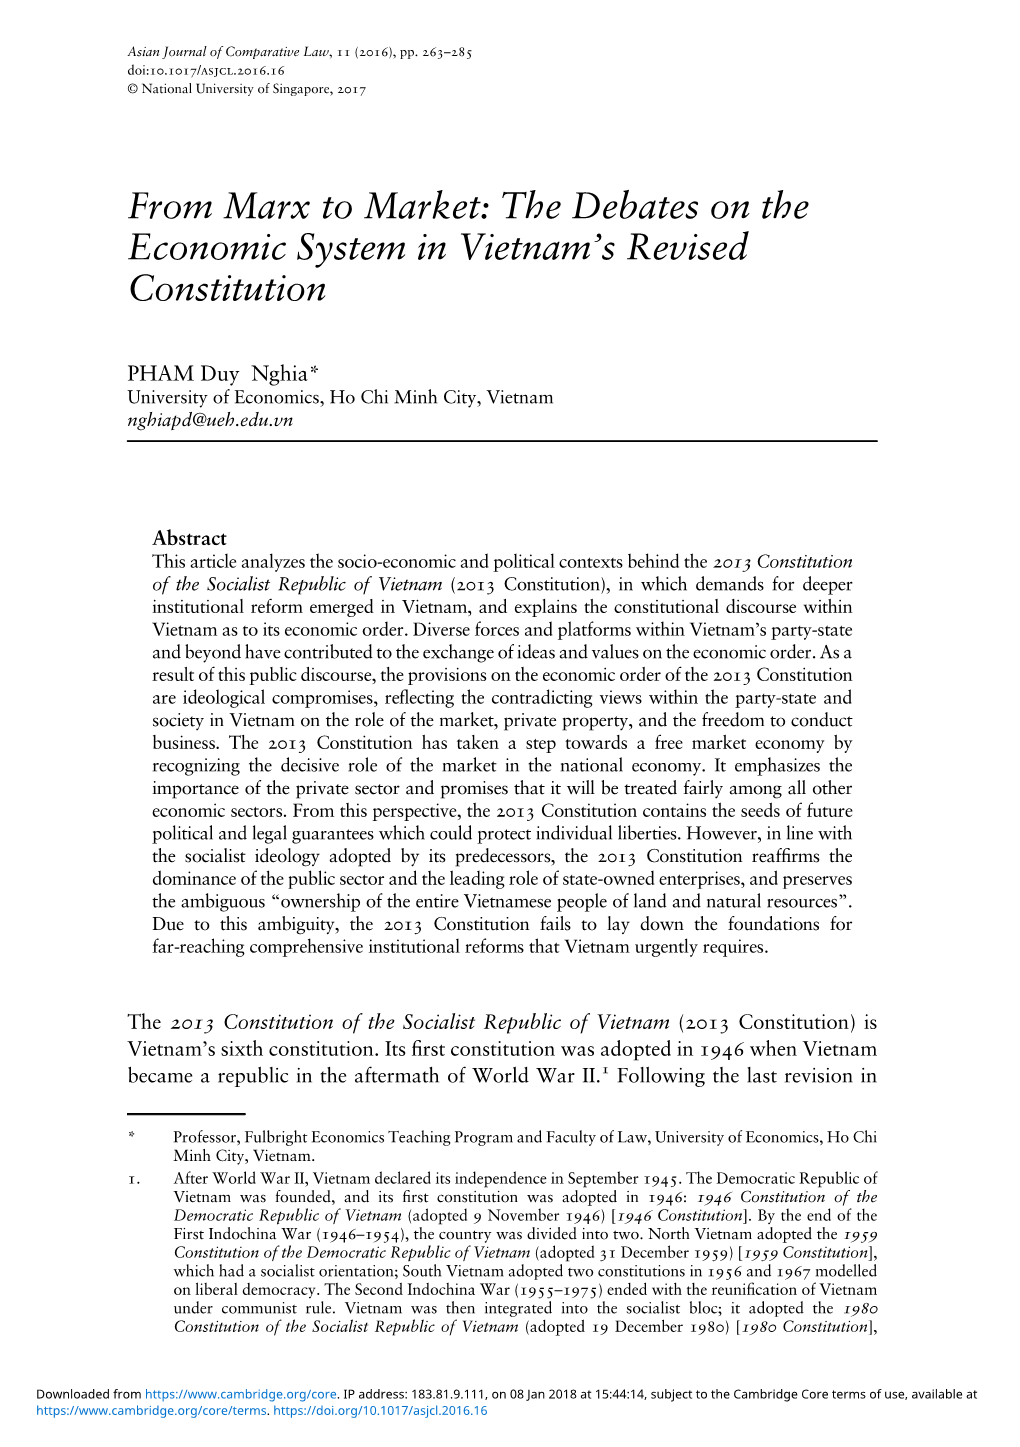 From Marx to Market: the Debates on the Economic System in Vietnam's